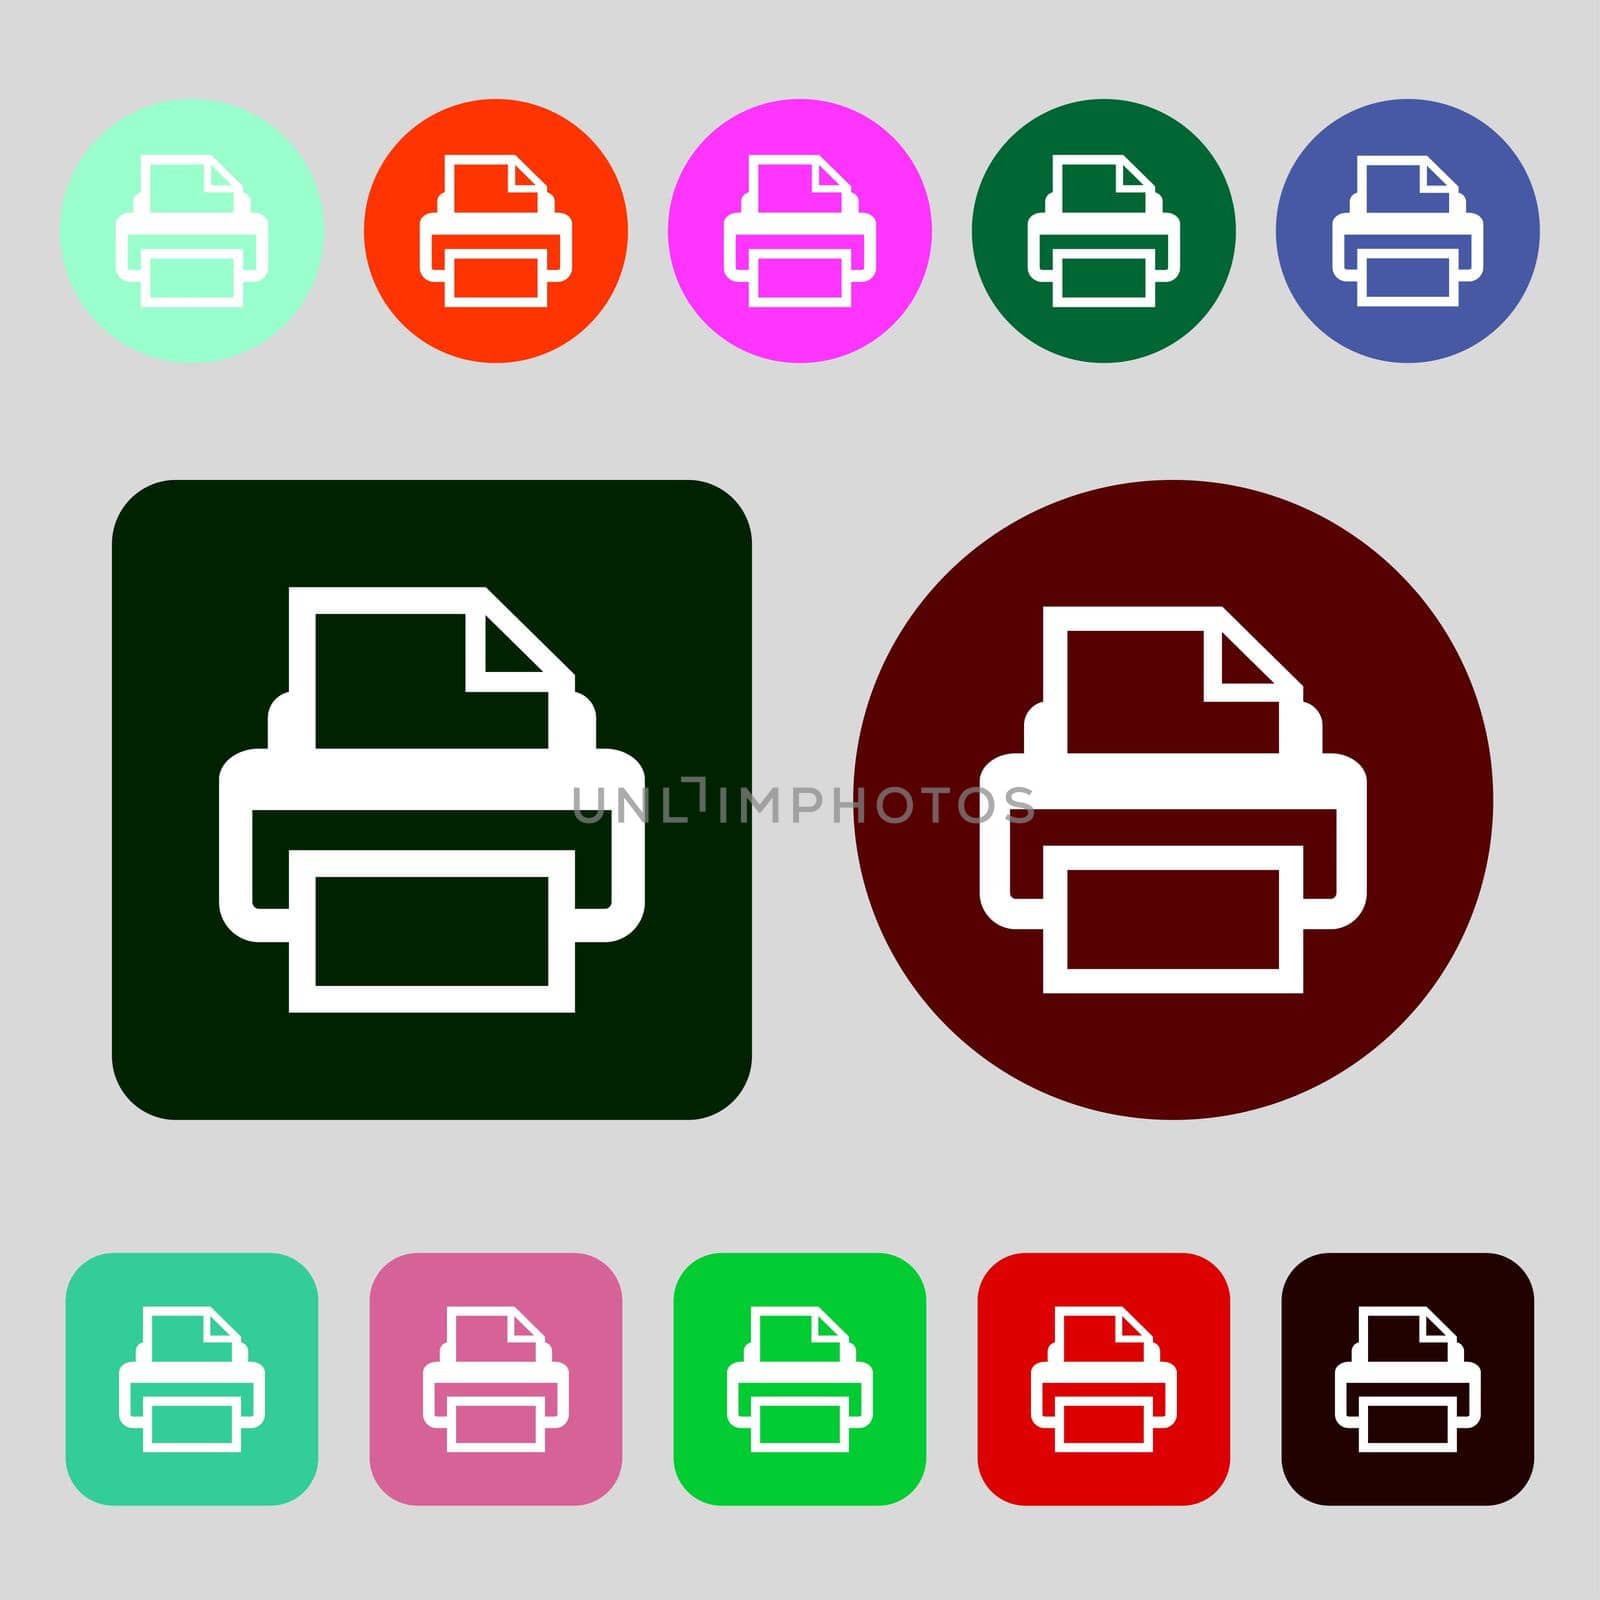 Print sign icon. Printing symbol.12 colored buttons. Flat design. illustration